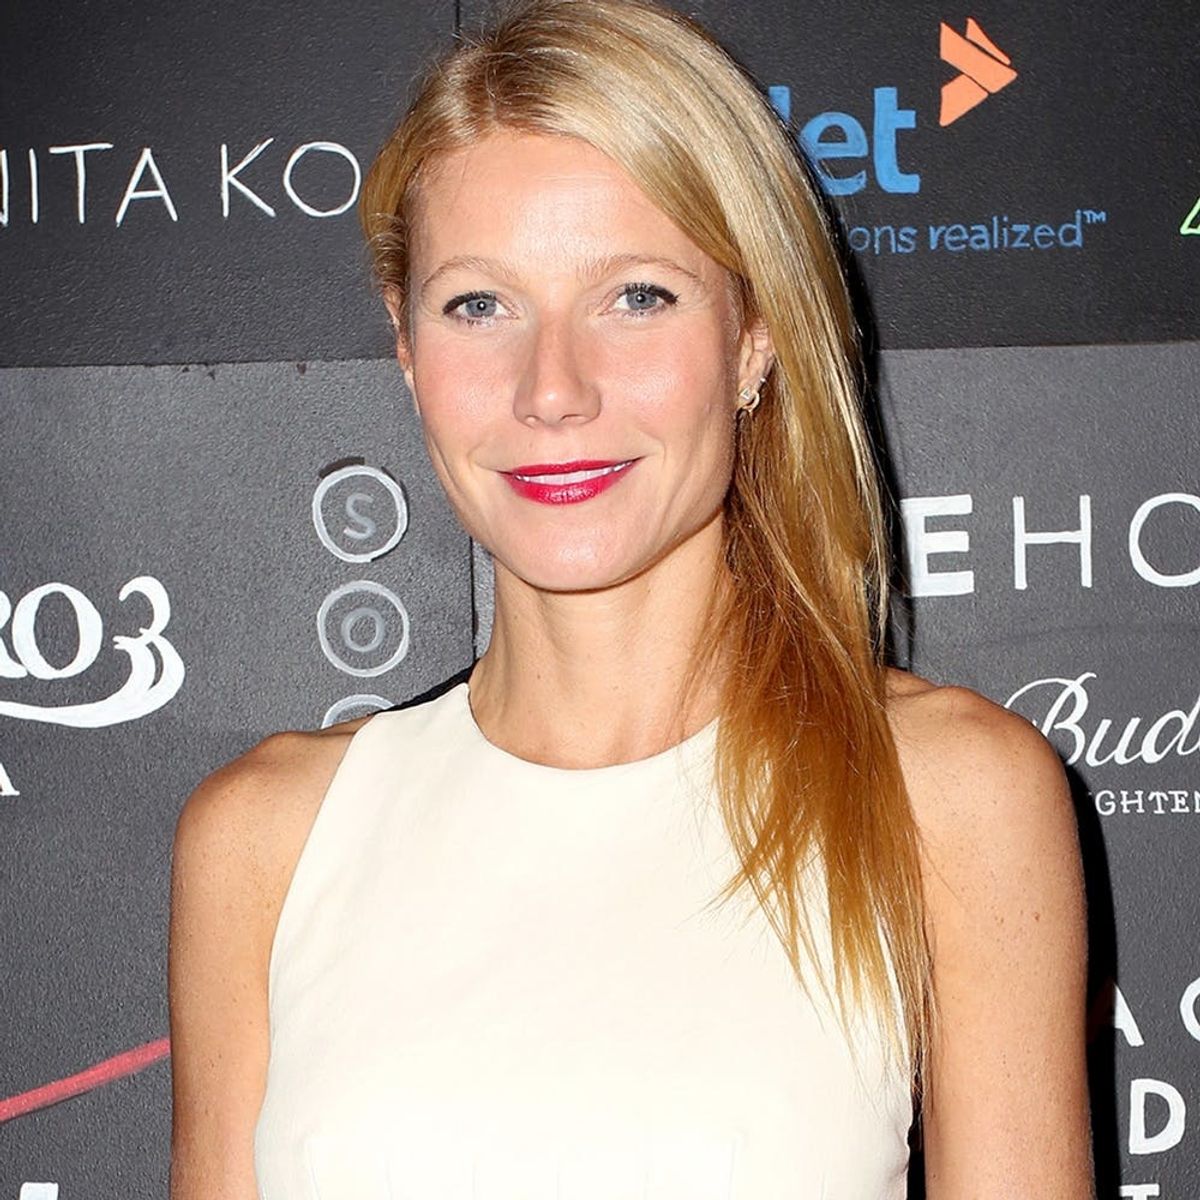 Why Gwyneth Paltrow’s Family Photo Will Make You Do a Double Take